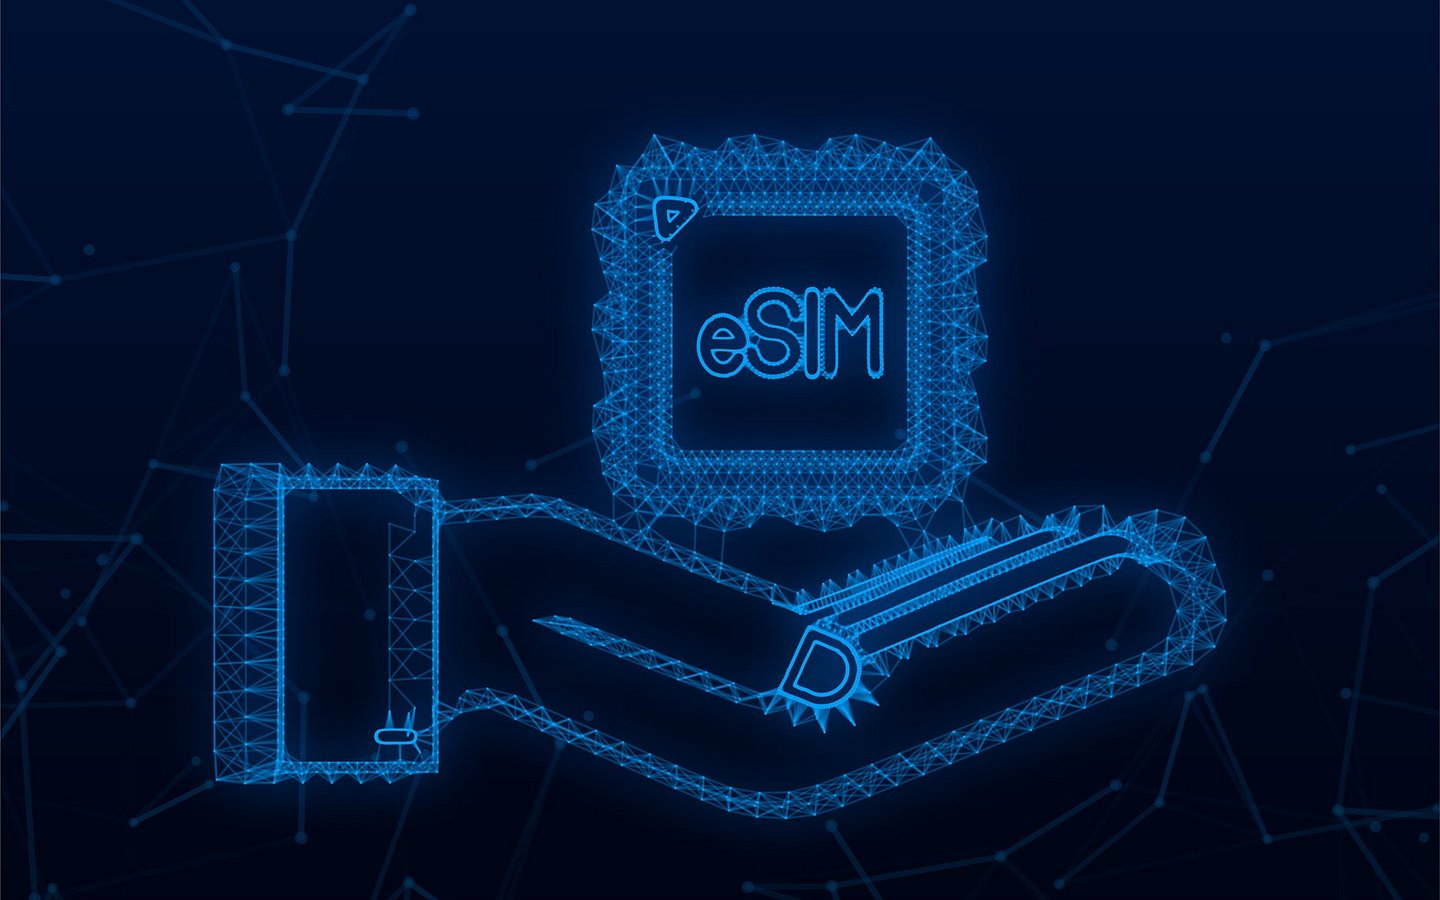 Illustration of a hand with an eSIM card